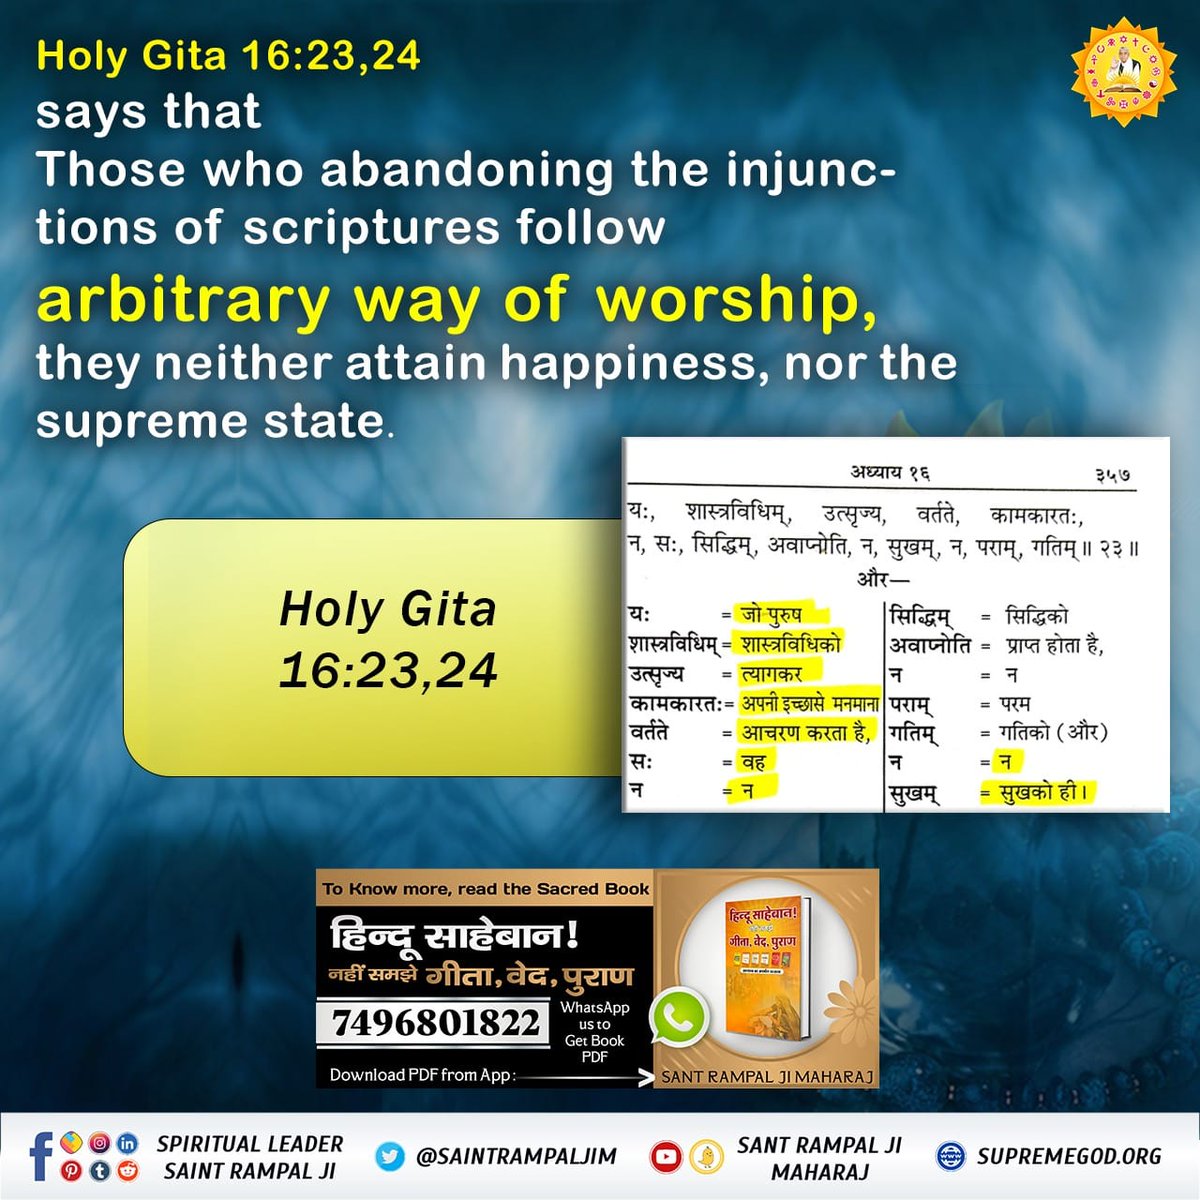 #tuesdaythoughts #tuesdaymotivations #godmorningtuesday #SaintRamaalJiQuoes   PIOUS SHRI GITAJI CH : 16 VERSE 23 SAYS :-  THOSE WHO DON'T WORSHIP ACCORDING TO SCRIPTURES , NEITHER ATTAIN HAPPINESS  , NOR SALVATION .  SEE THE EVIDENCE BELOW IN IMAGE .